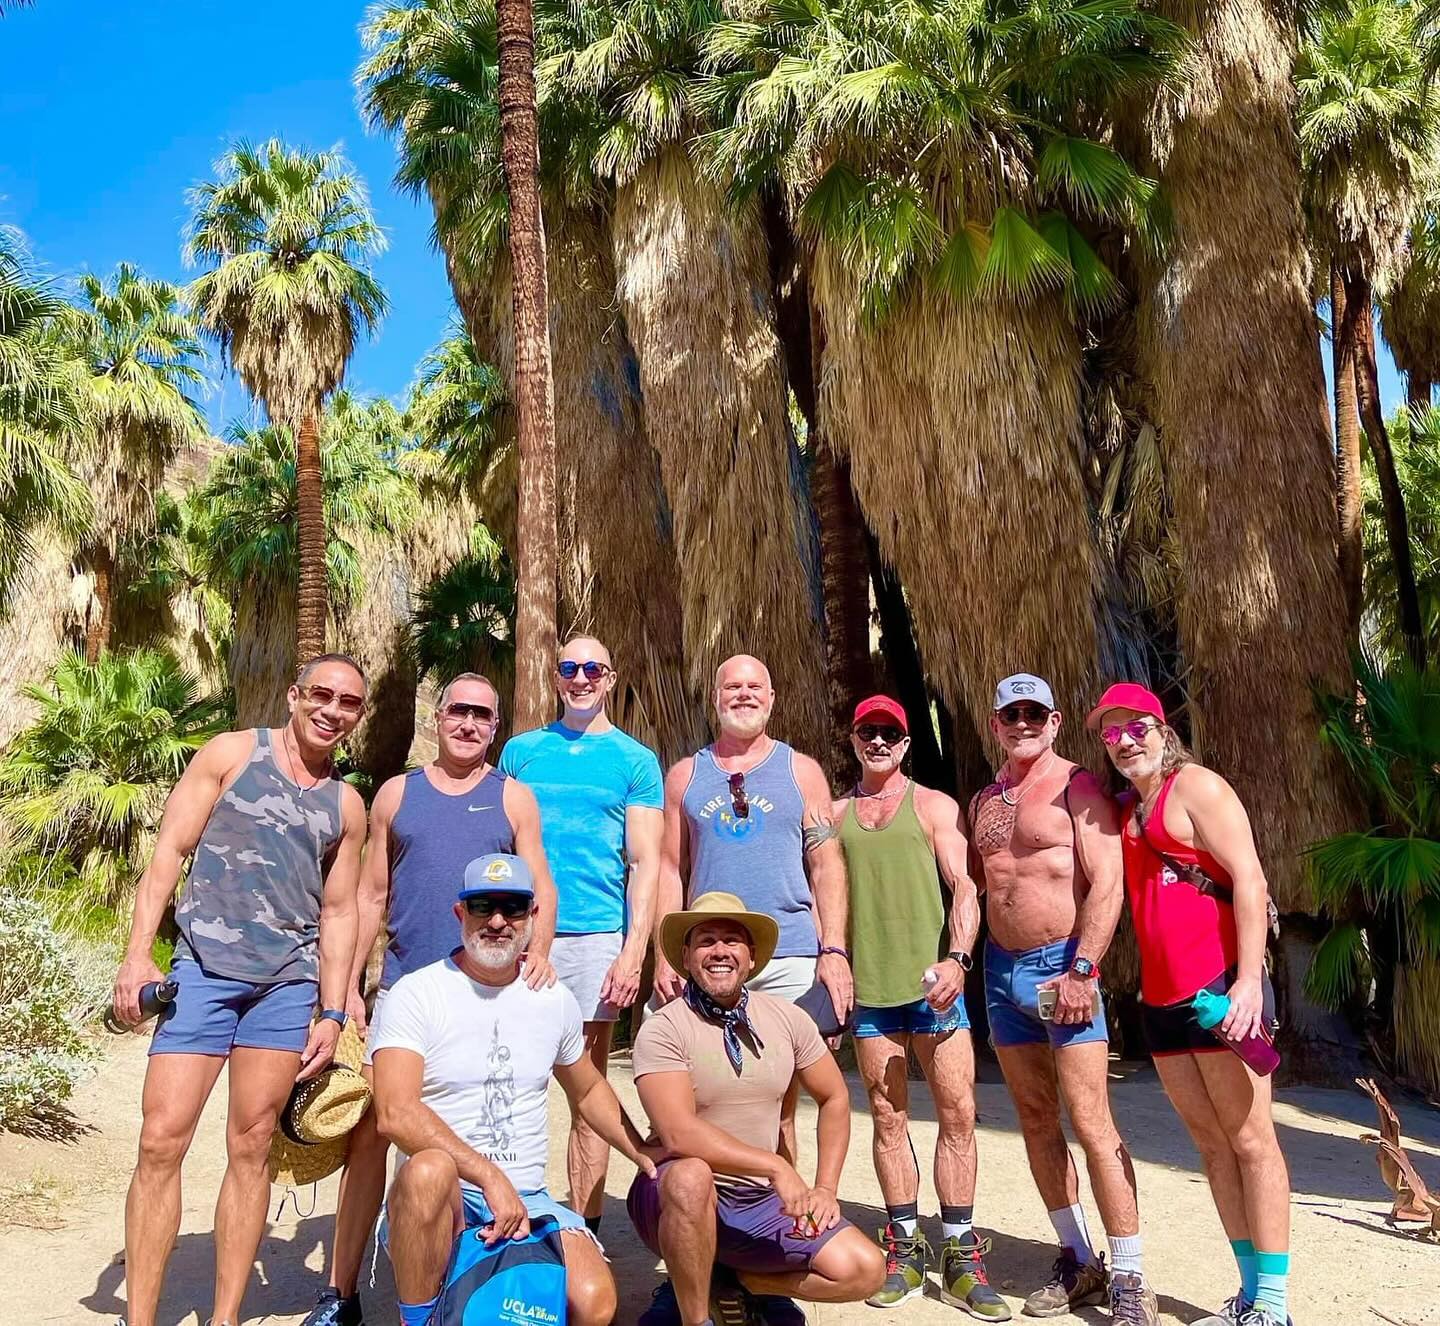 Beautiful morning hike through and above Palm Canyon Trail in Palm Springs. #palmcanyontrail #palmsprings #nature #oasis #mountains #friends #fitness